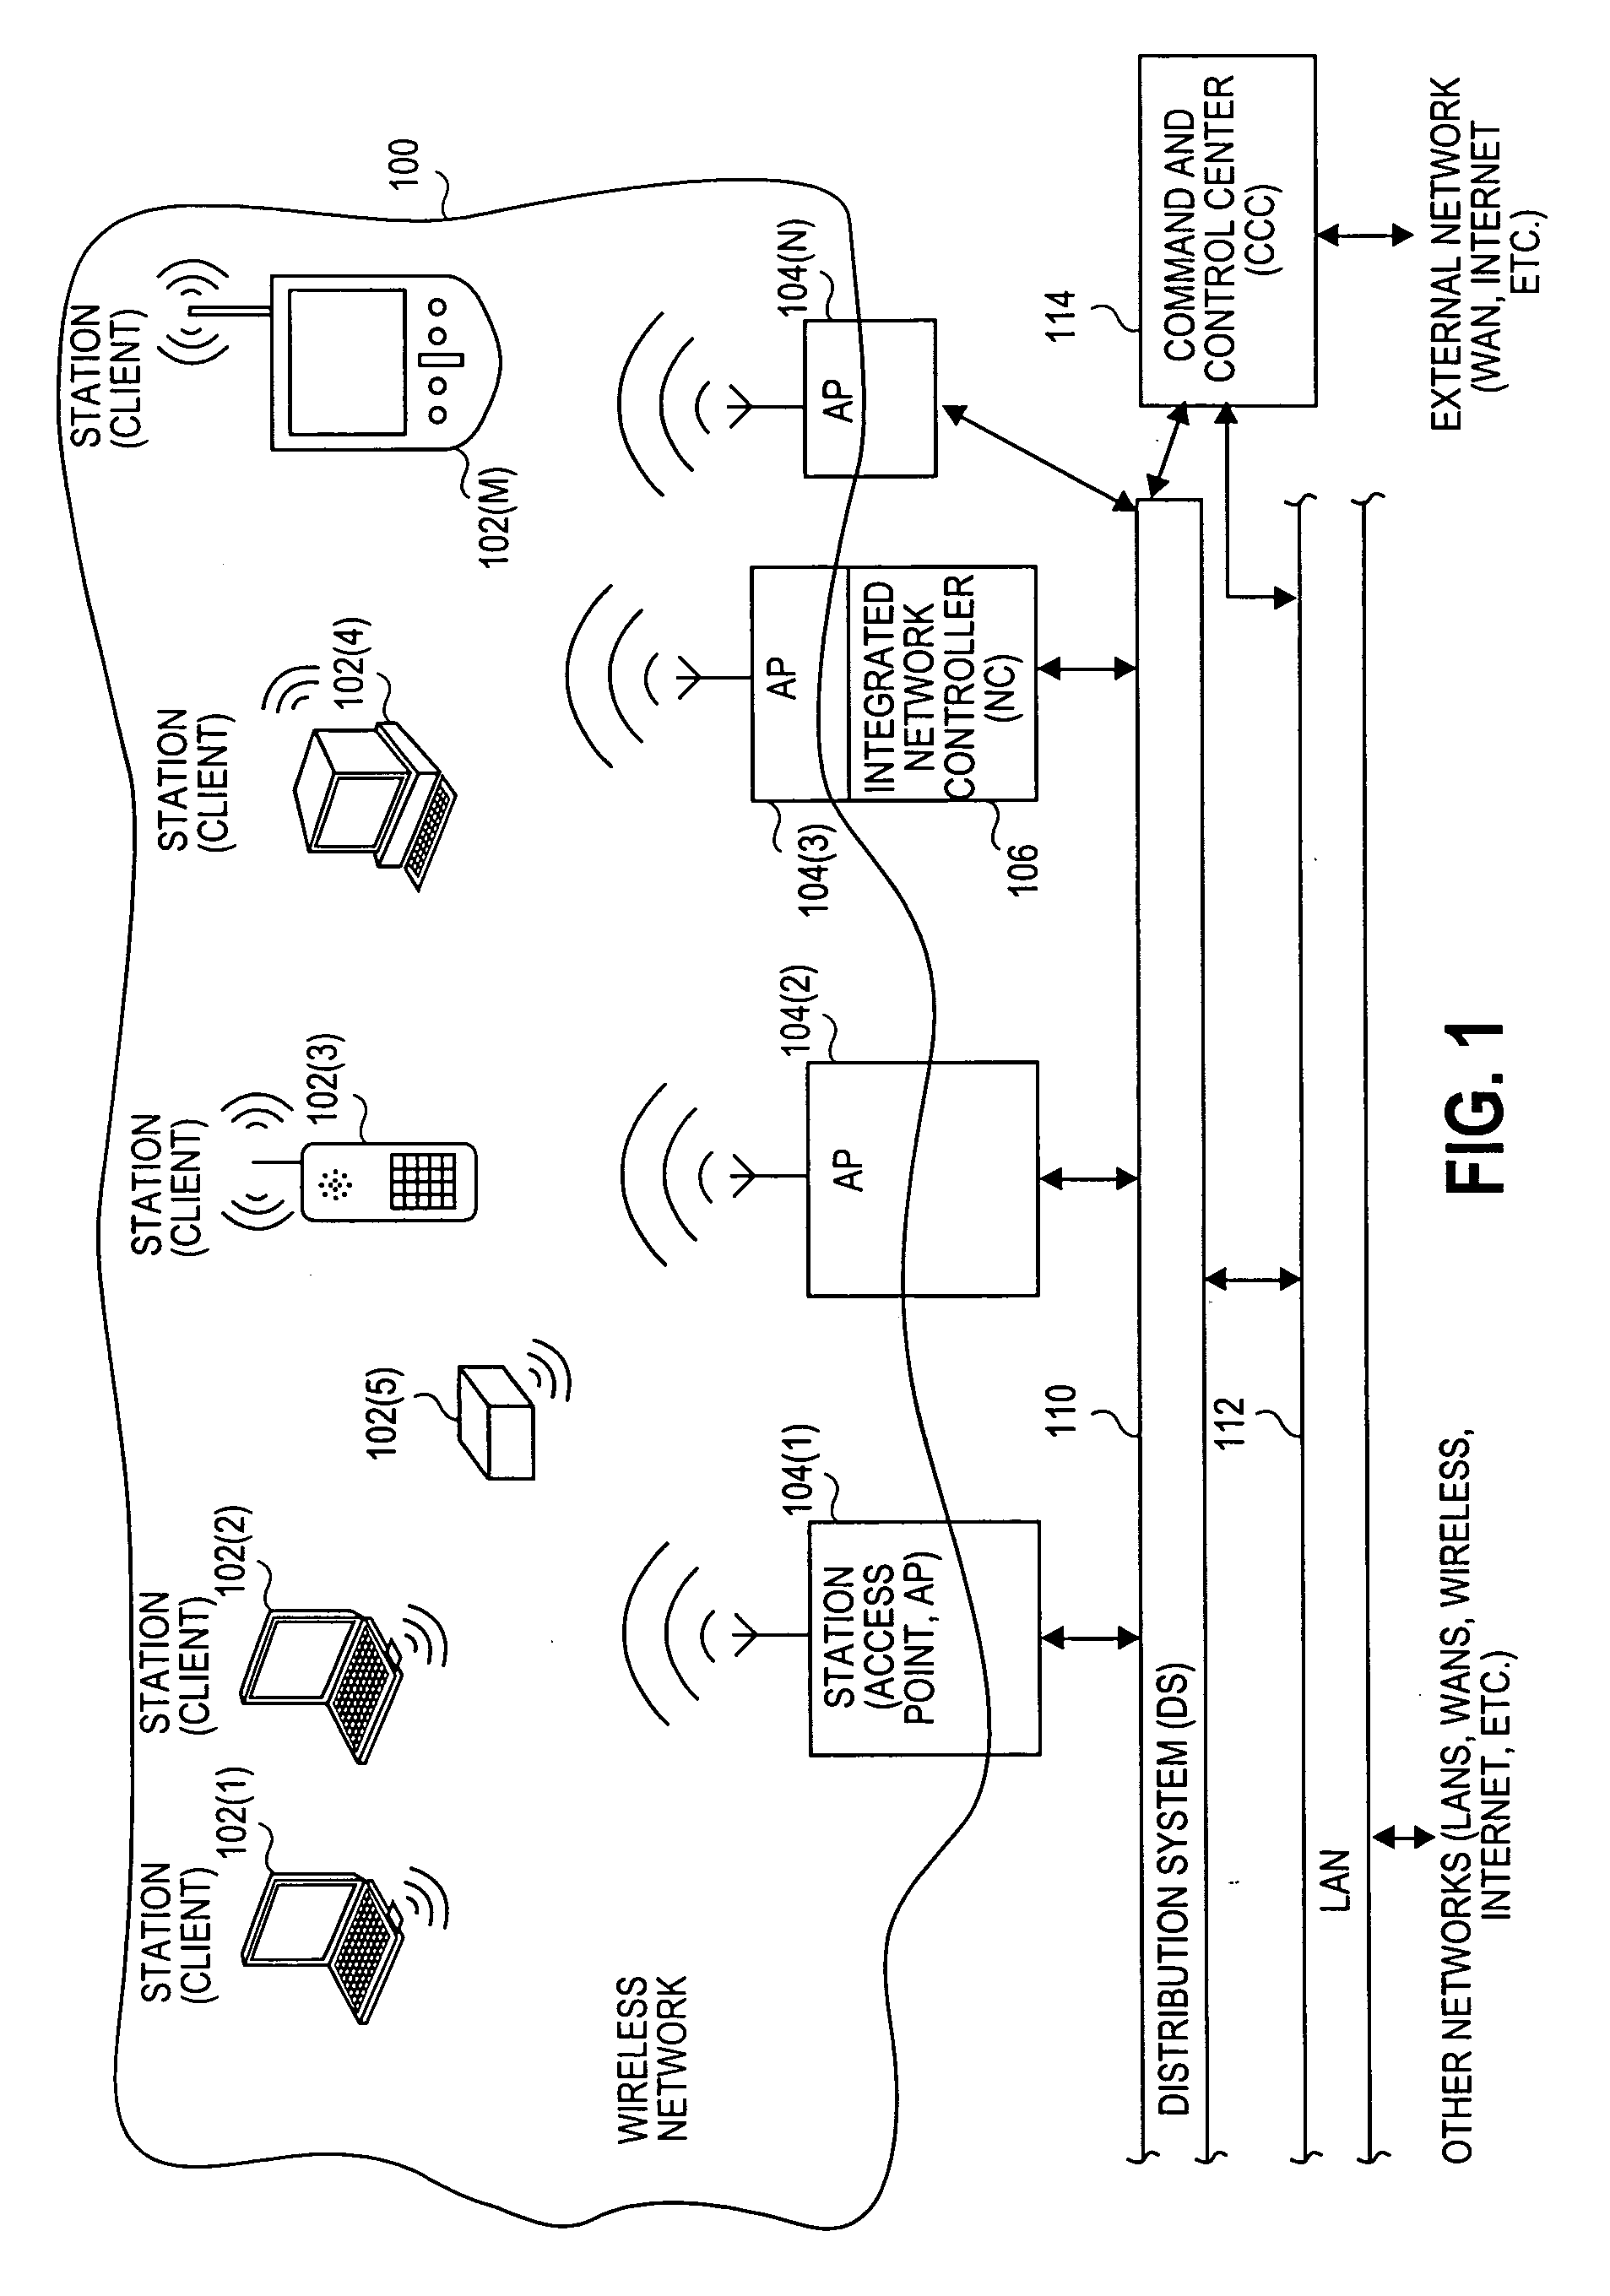 Visitor gateway in a wireless network